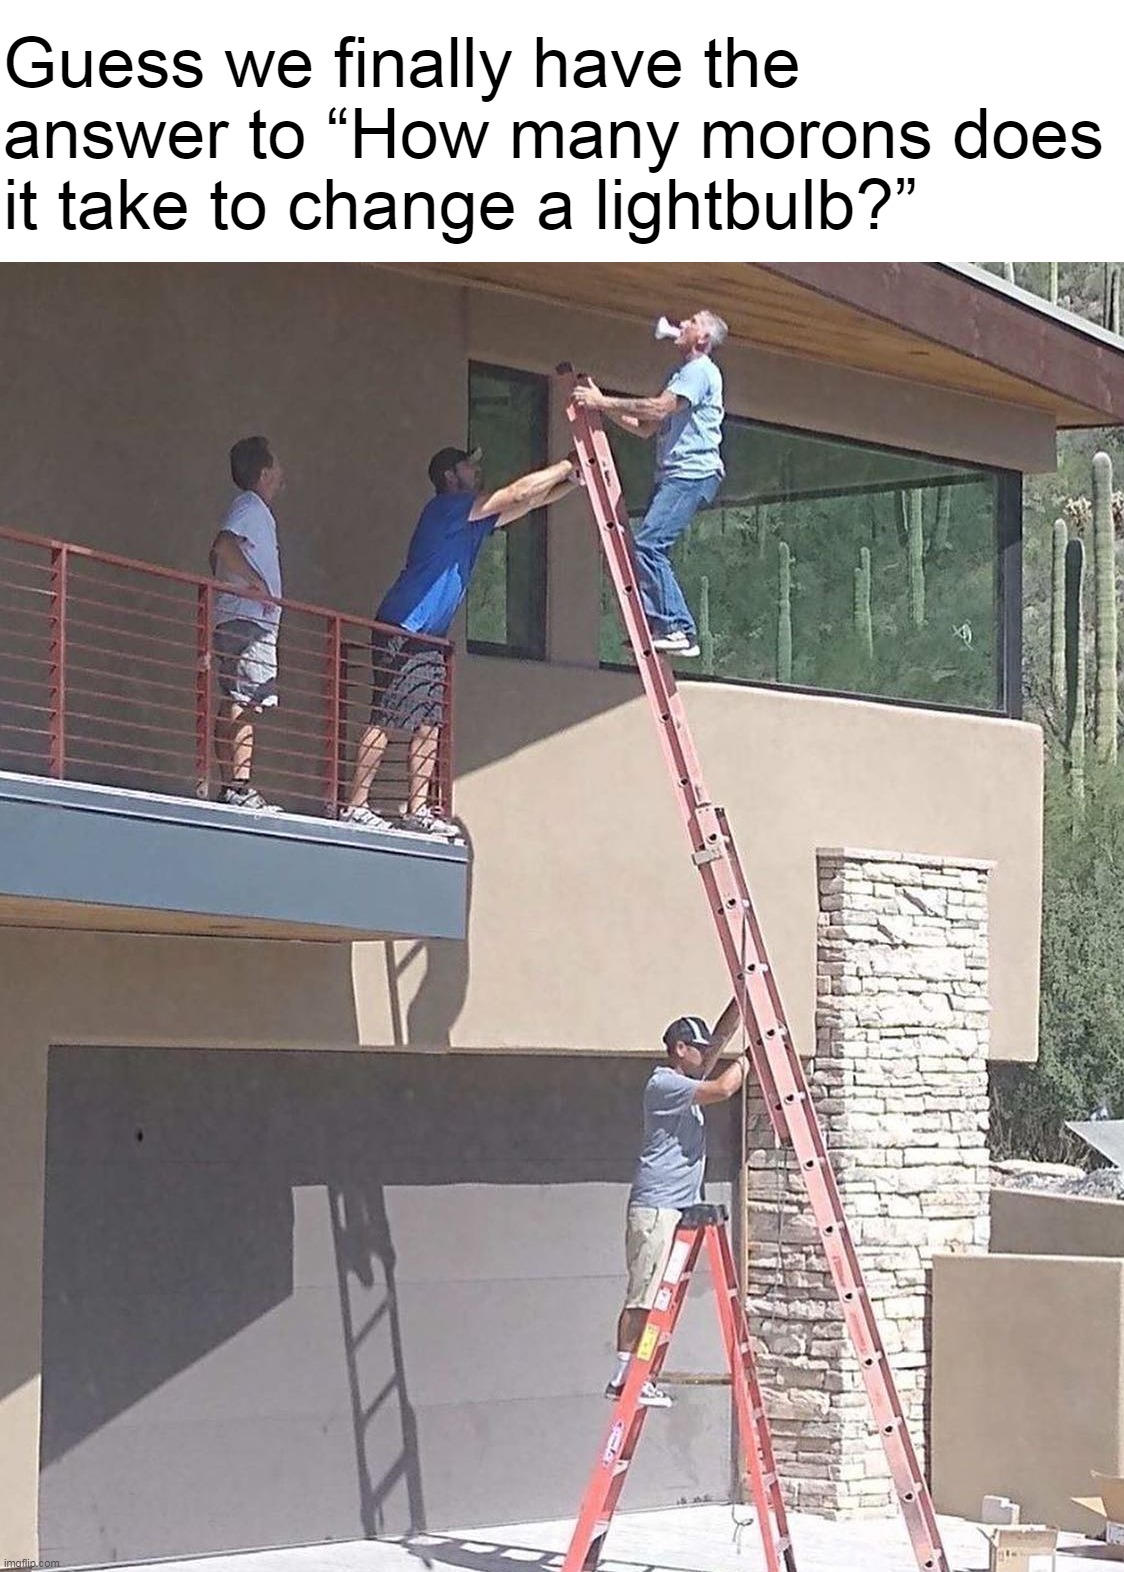 "Team-Building" Activity | Guess we finally have the answer to “How many morons does it take to change a lightbulb?” | image tagged in meme,memes,humor | made w/ Imgflip meme maker